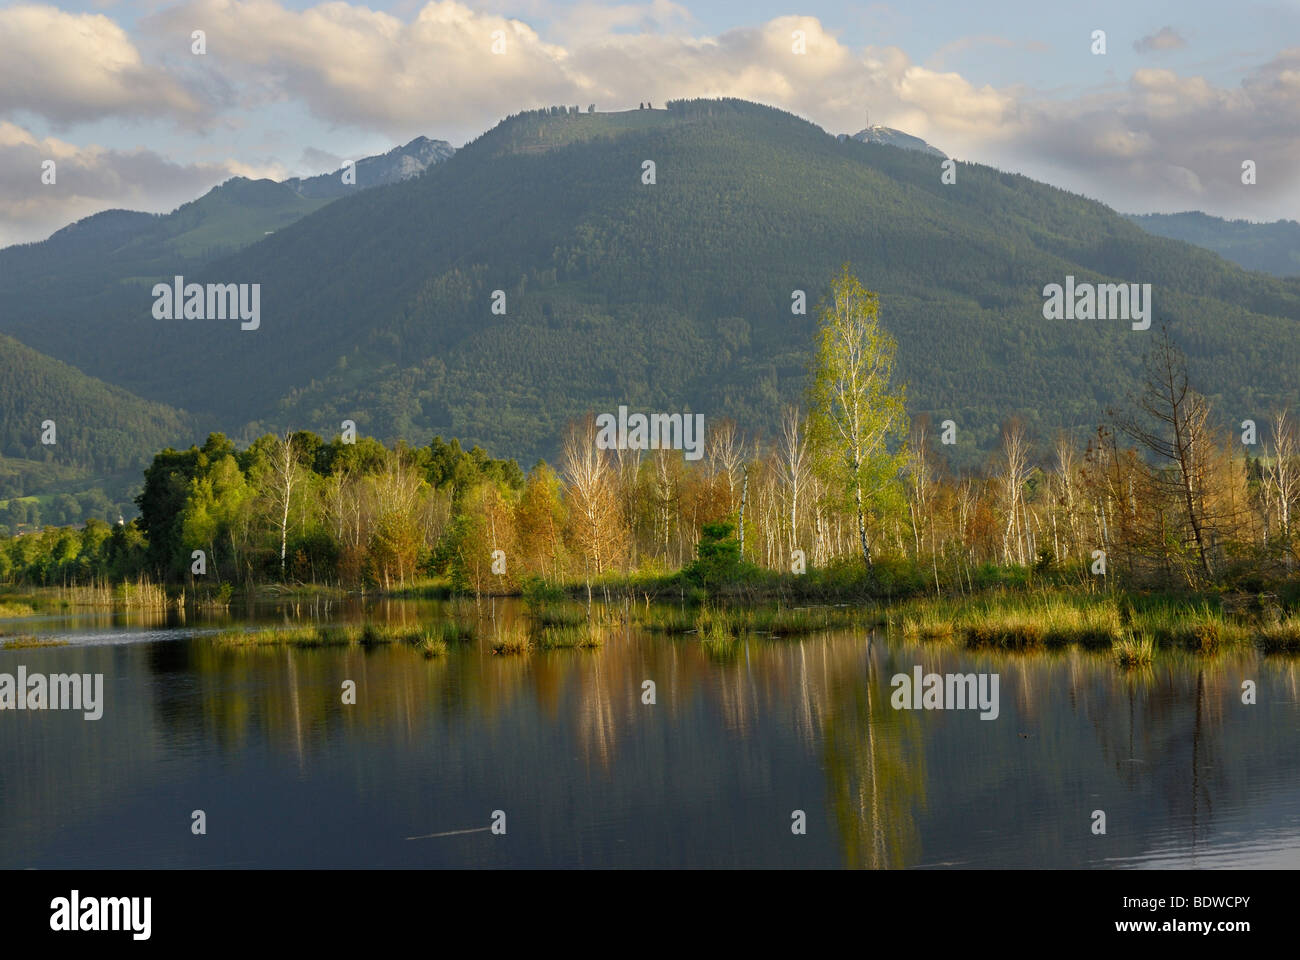 Evening at a moor pond with birch grove (Betula pubenscens), mountains in the back, Grundbeckenmoor area, Nicklheim, Bavaria, G Stock Photo